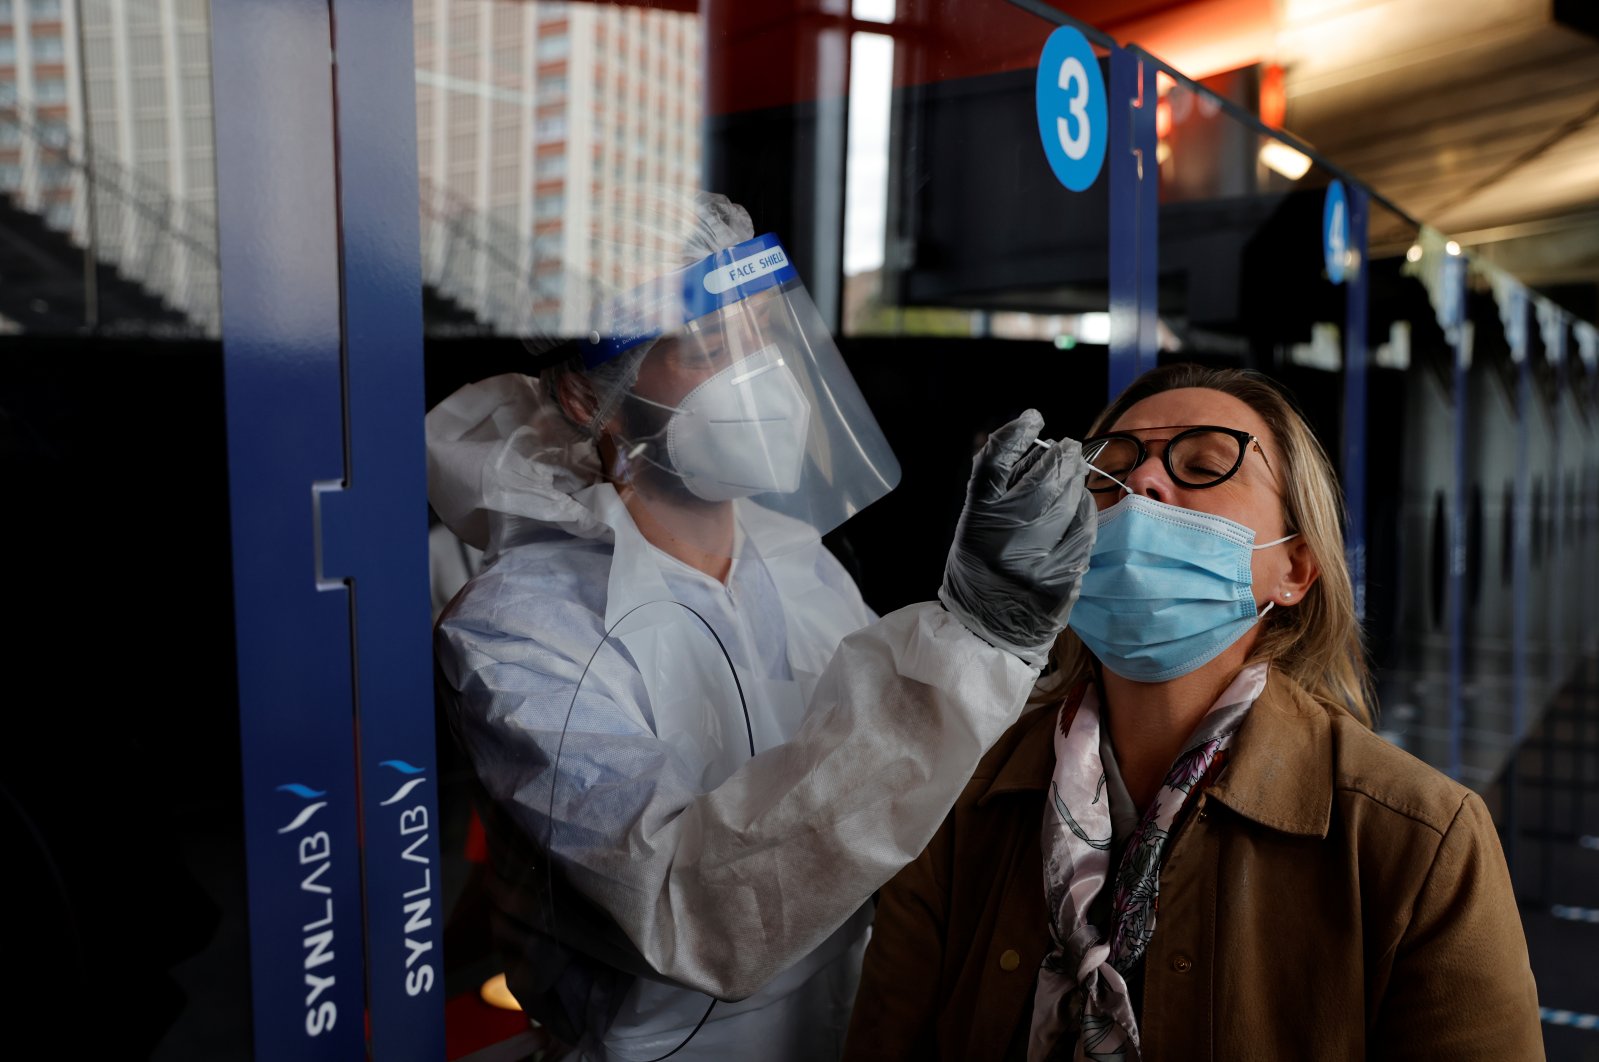 A health worker, wearing a protective suit and a face mask, administers a nasal swab to a patient in a temporary testing site for the coronavirus disease (COVID-19) at the Zenith Arena in Lille, France, October 15, 2020.  (Reuters Photo)